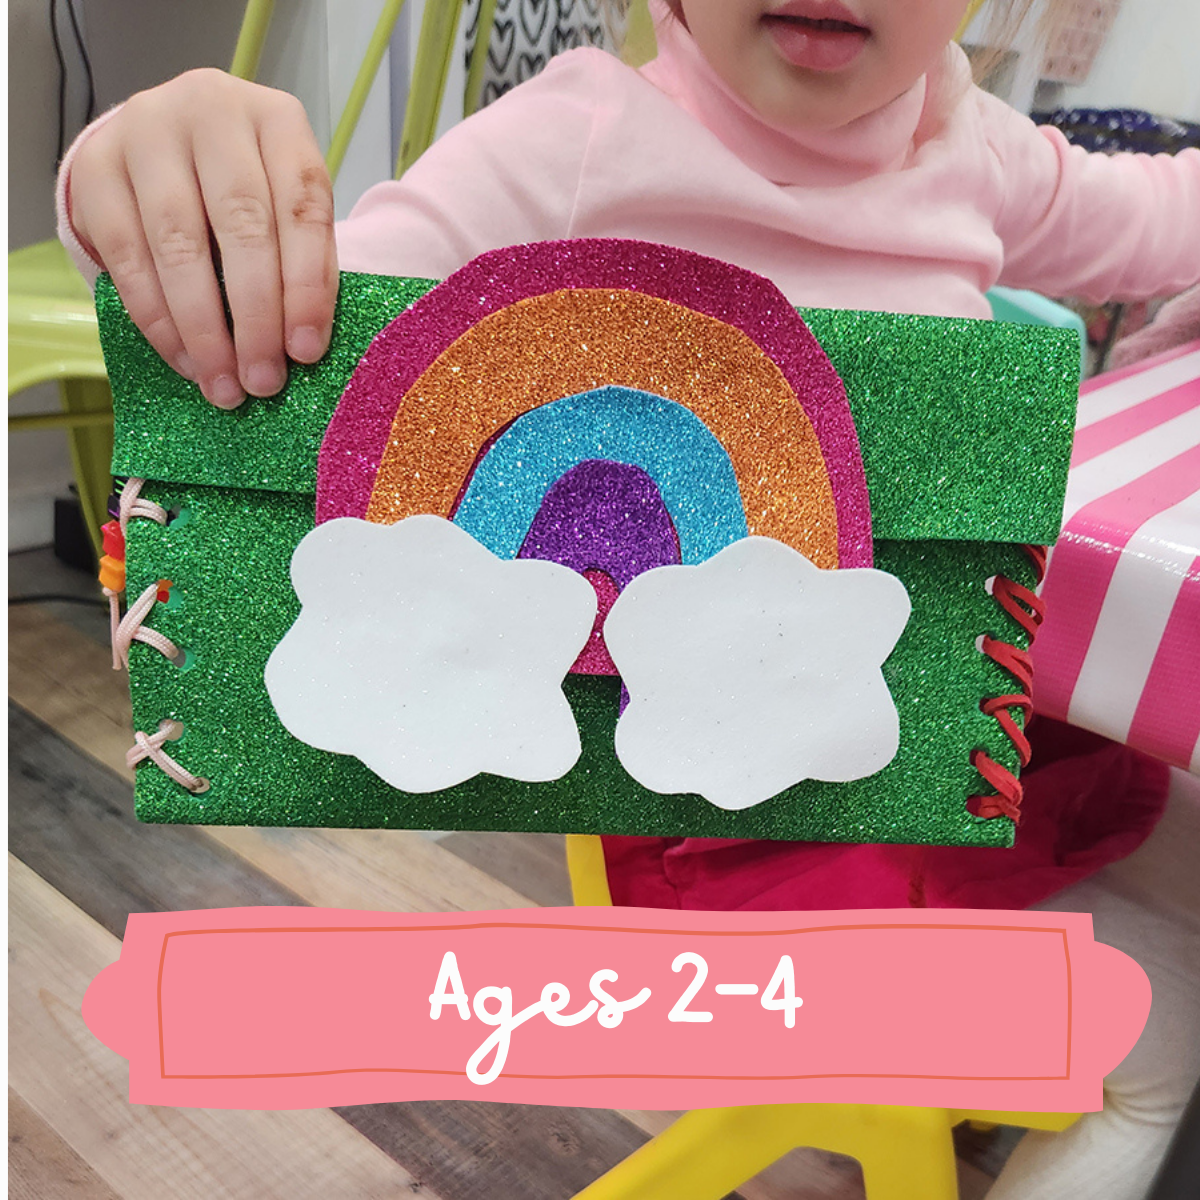 Toddler Fashion Crafts - Drop In Classes